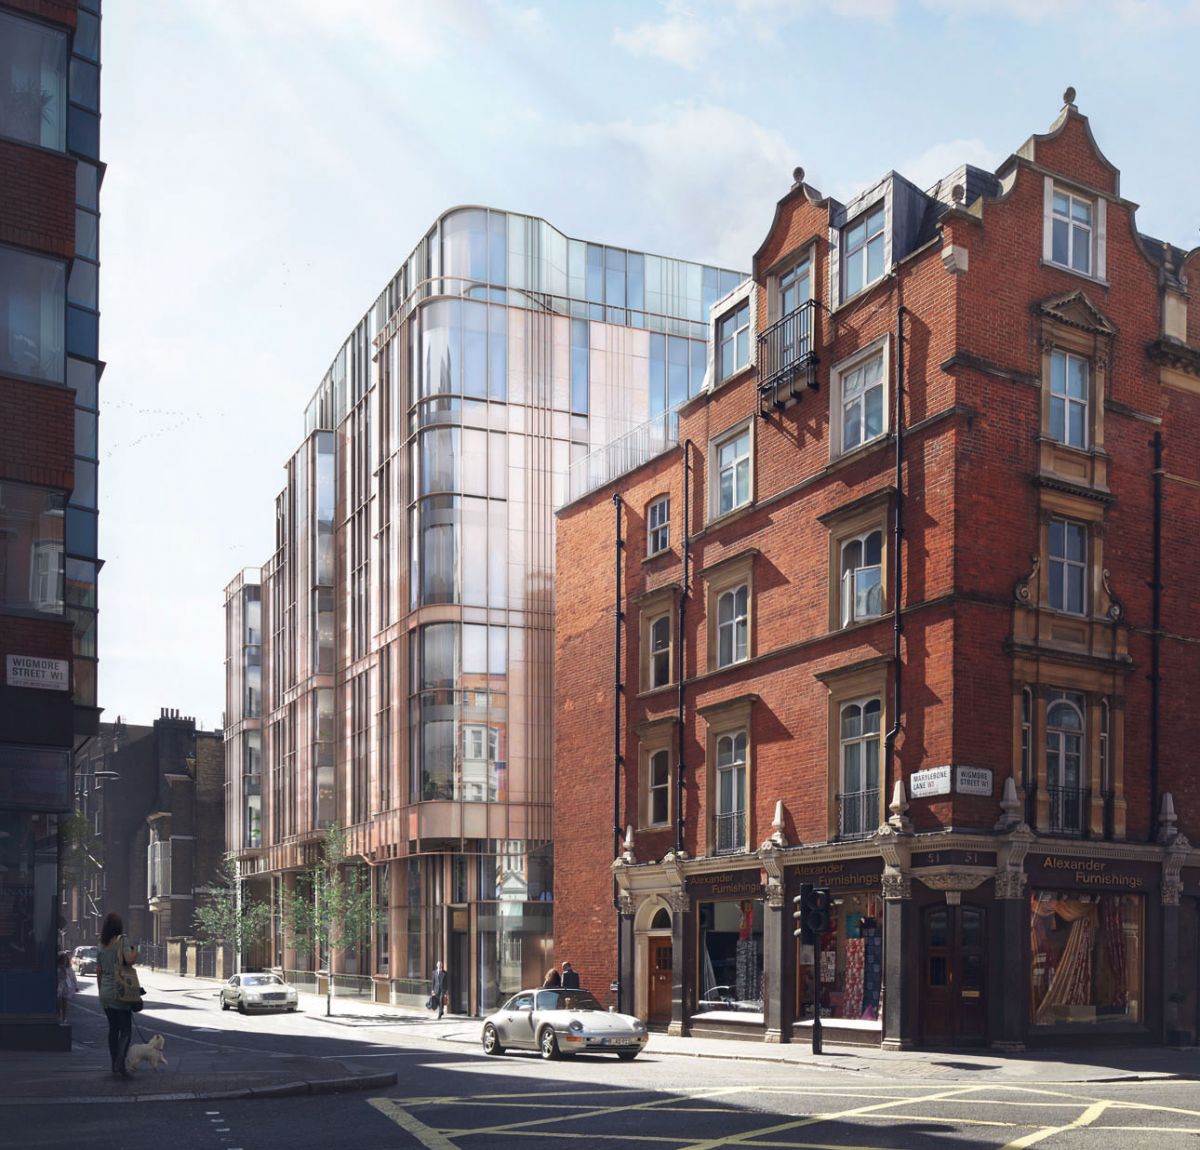 An image of the exterior of The Mansion Development on Marylebone Lane, London.